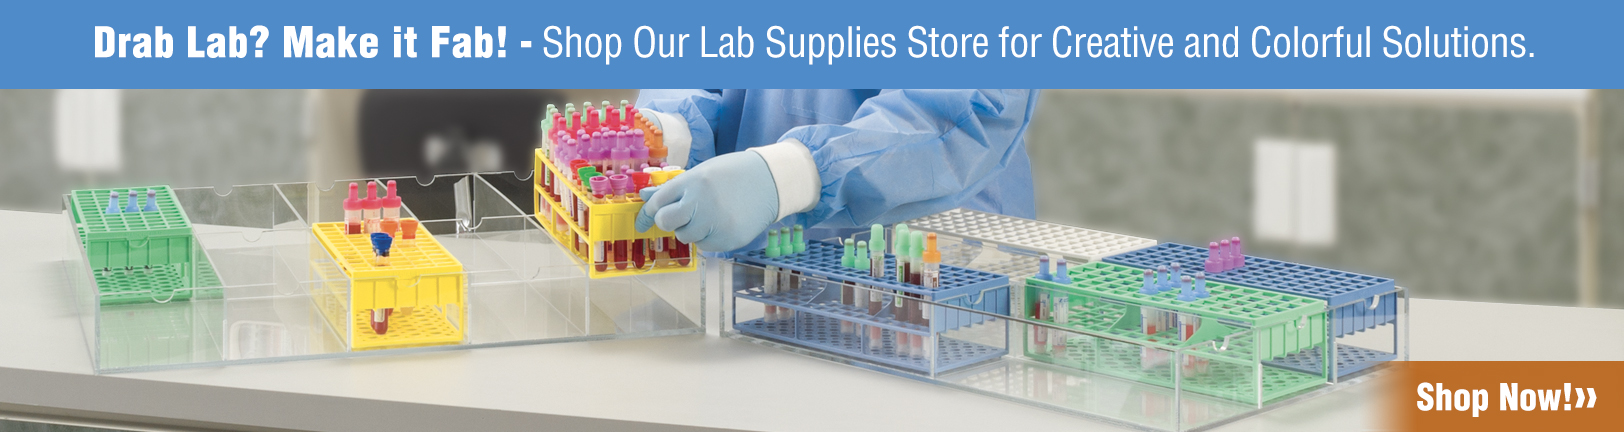 Shop Our Phlebotomy Store!